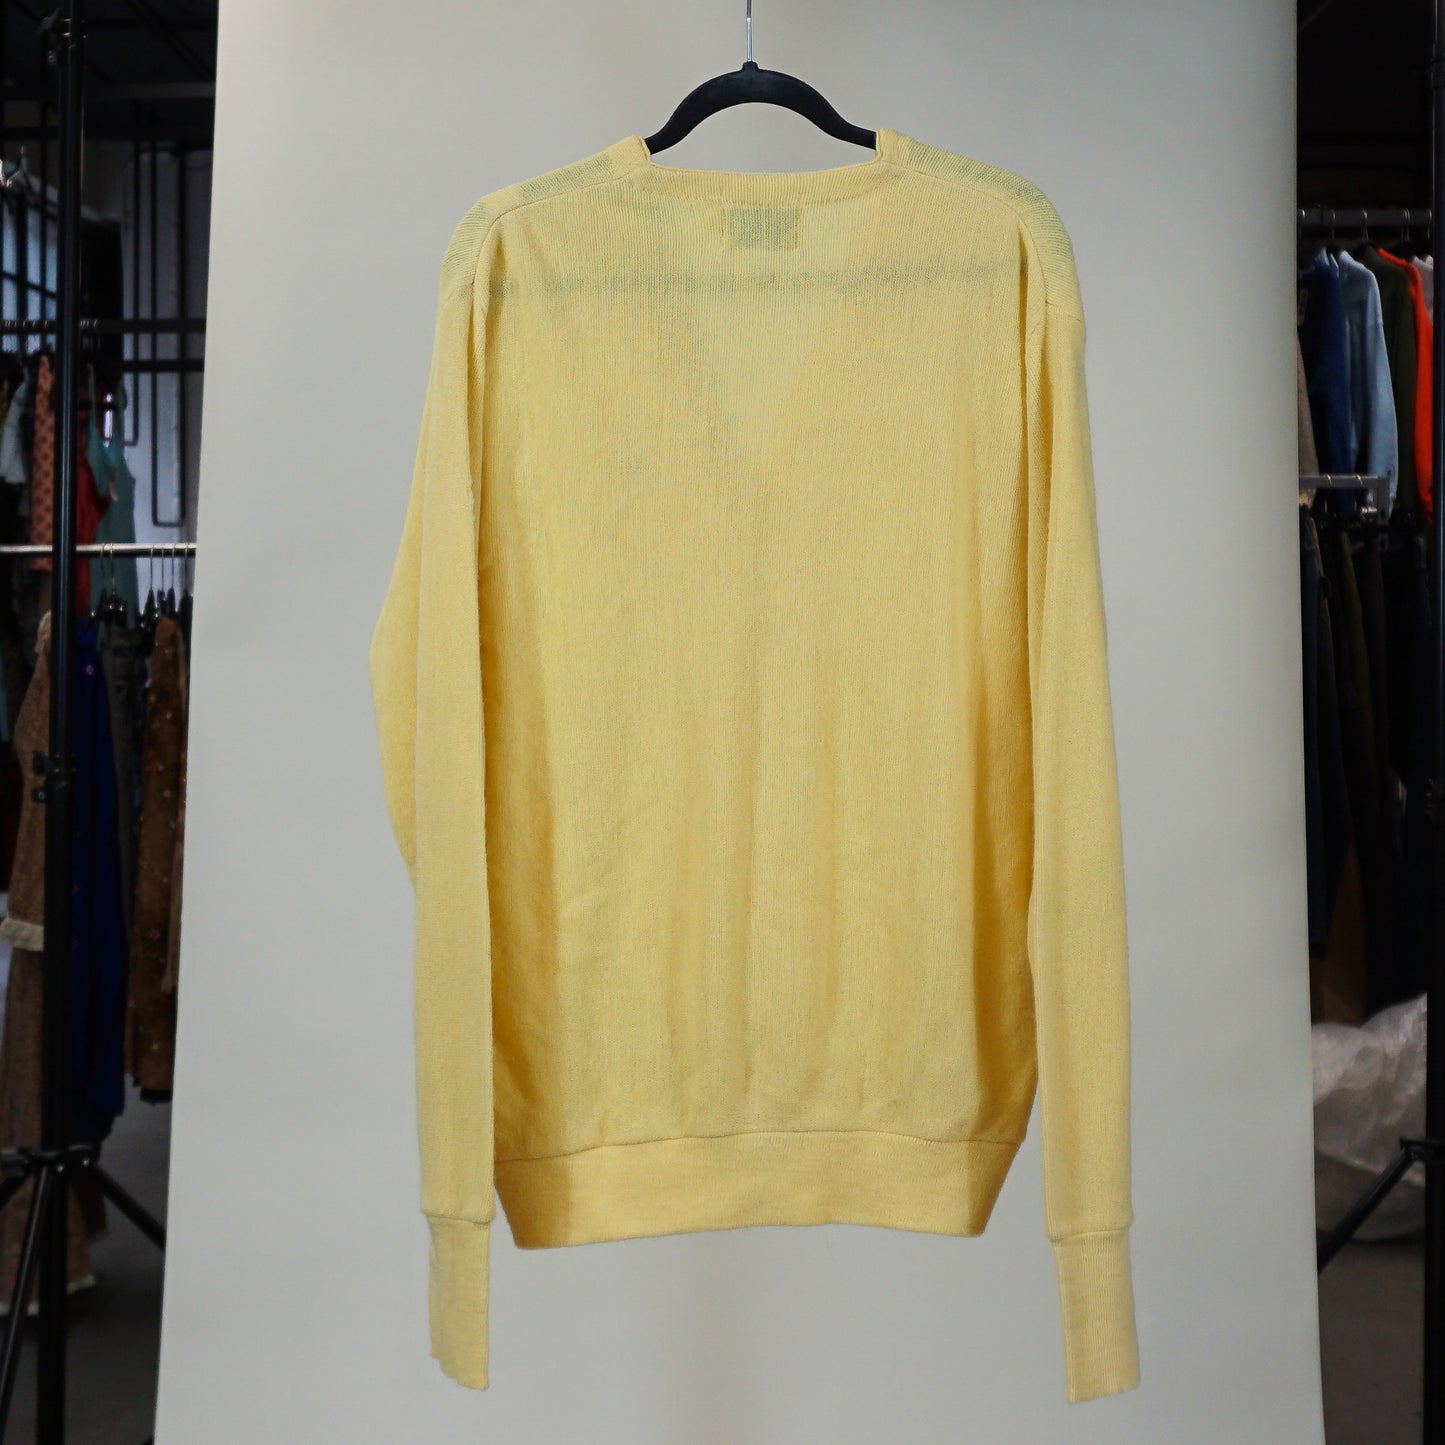 1980s Canary Yellow 'Steeplechase' Cardigan (XL)